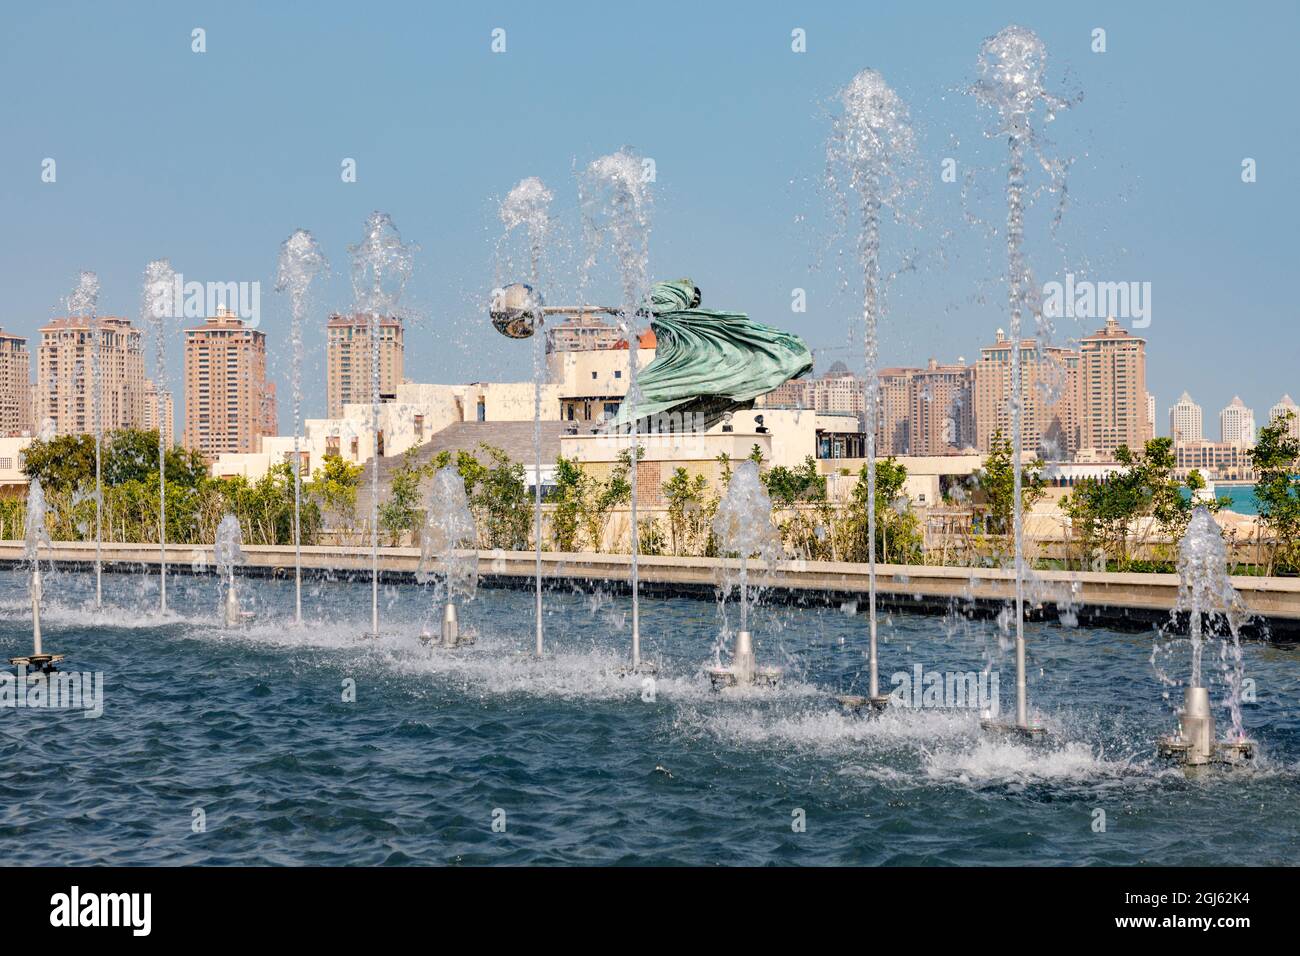 State of Qatar, Doha. The Dancing Fountains. Sculpture called 'Force of Nature' by Italian sculptor Lorenzo Quinn. Katara Cultural Center. (Editorial Stock Photo